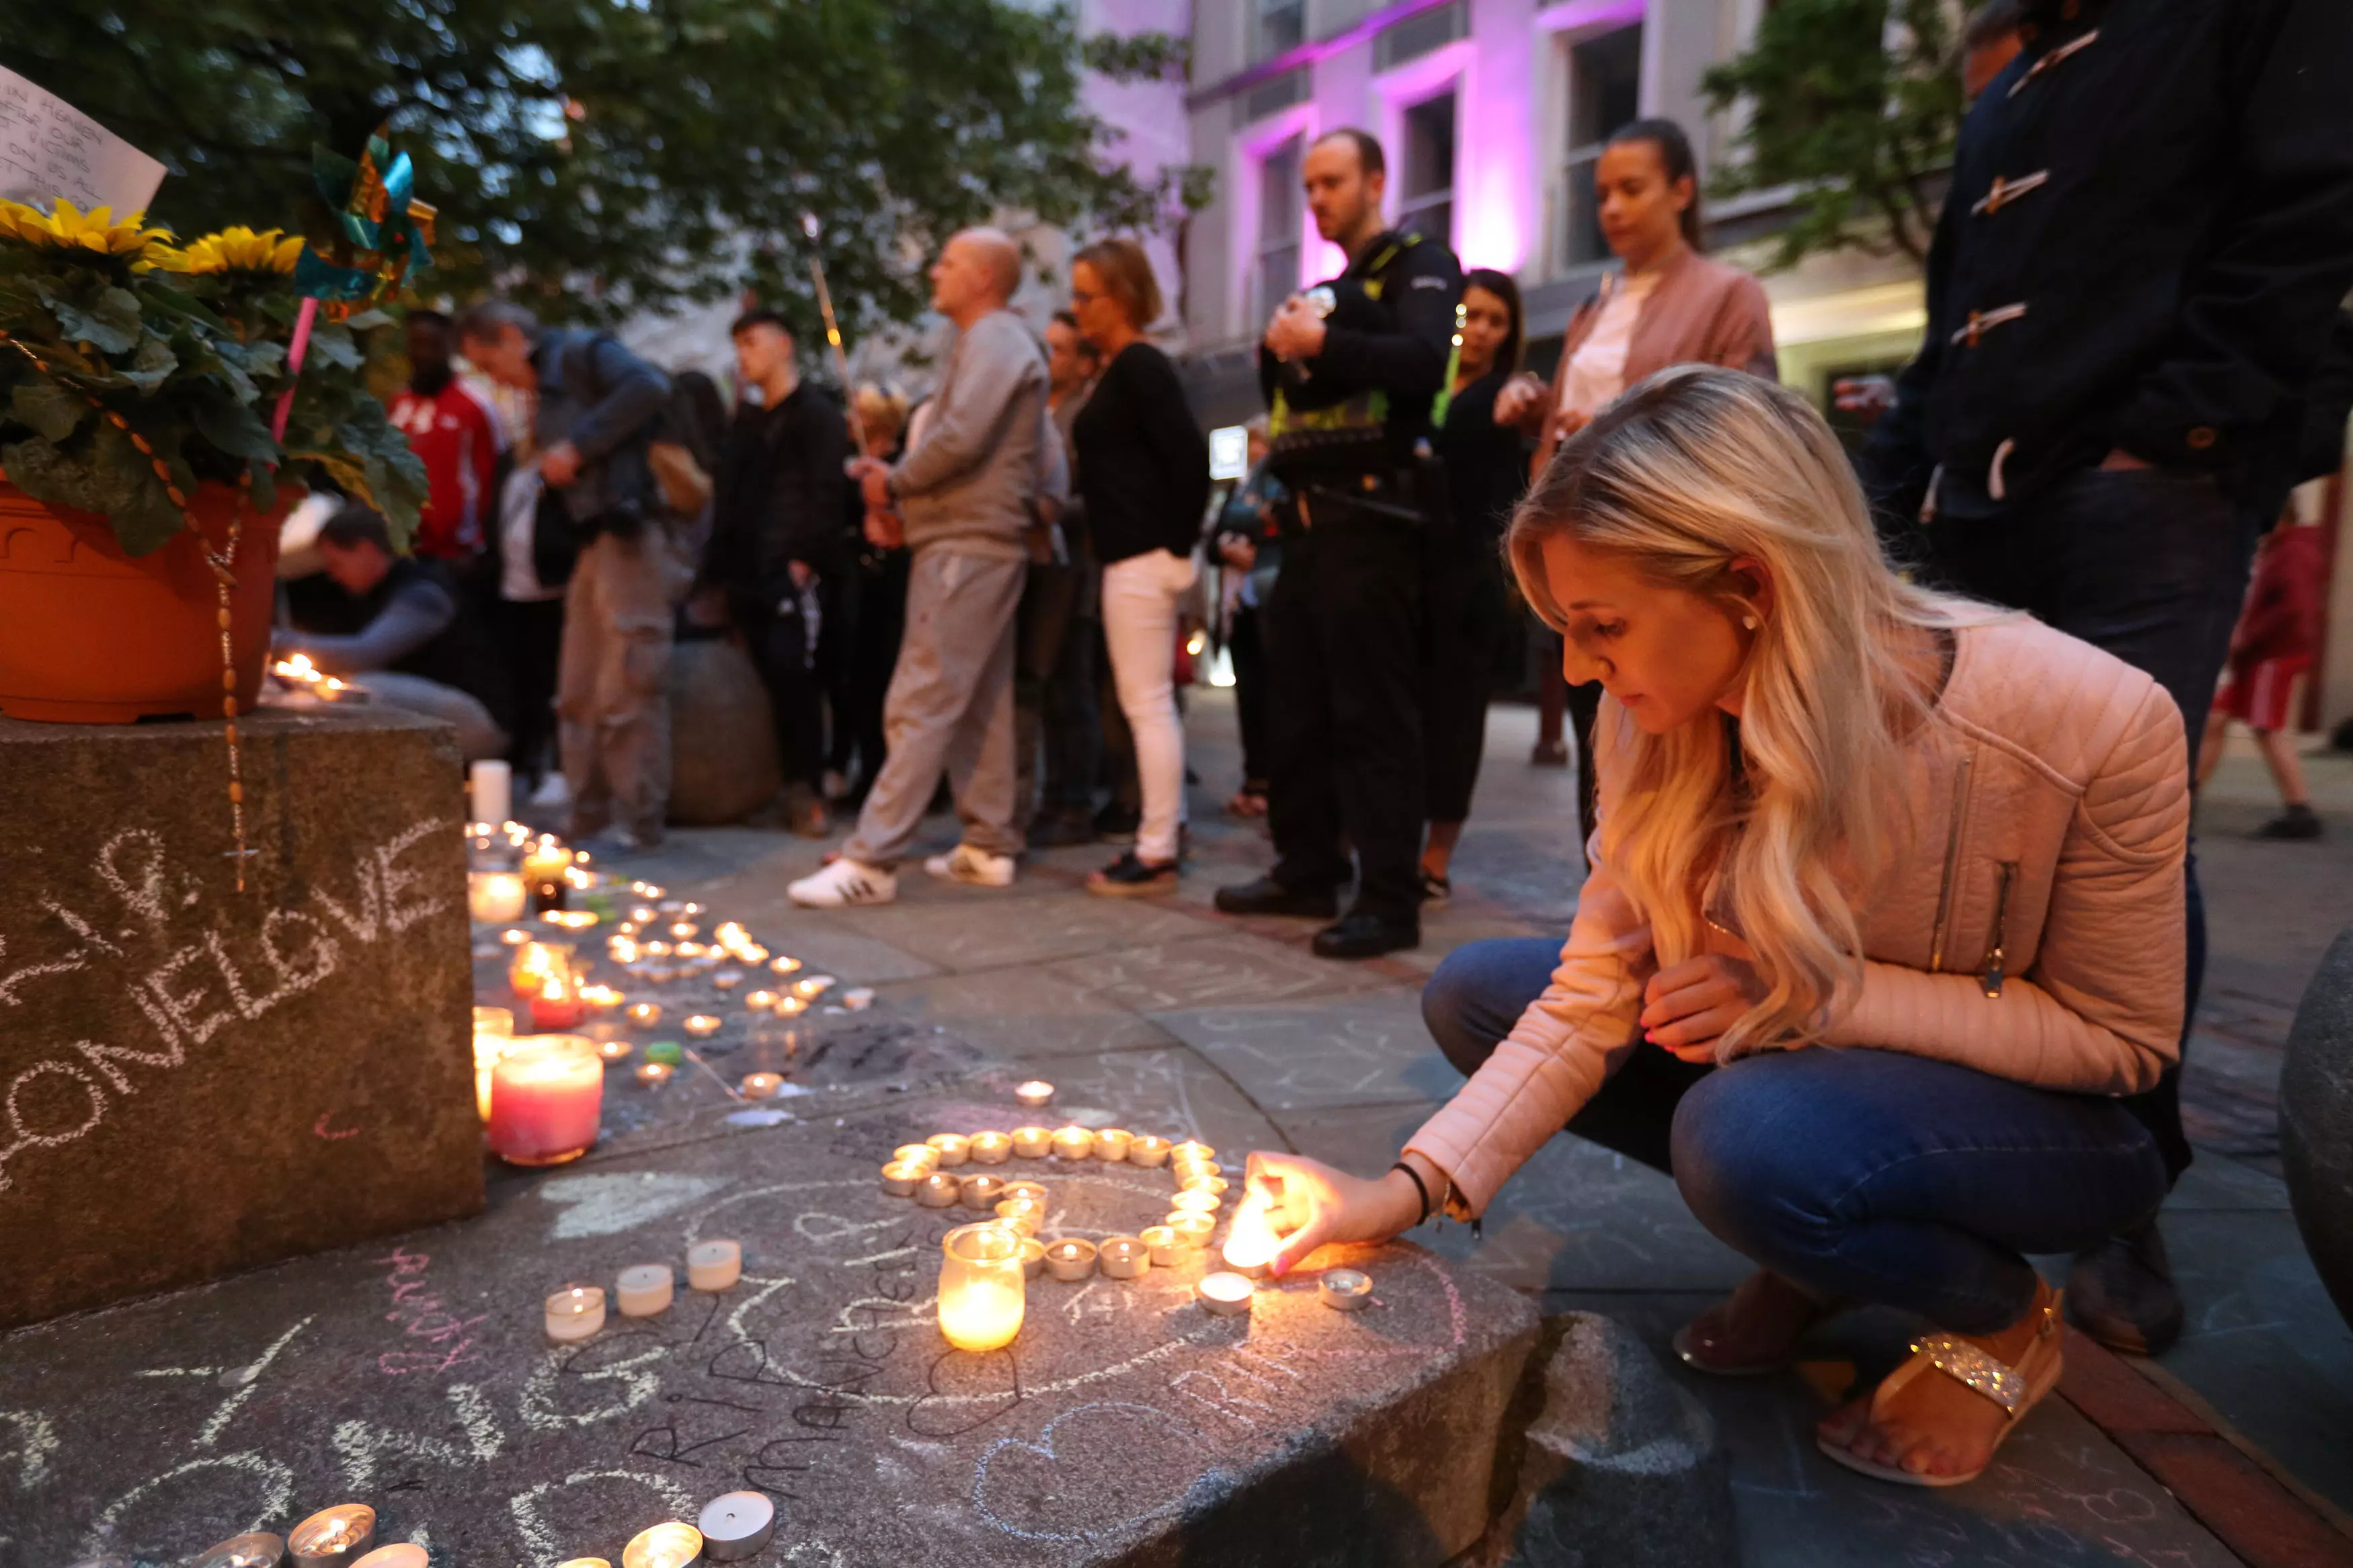 Manchester resident's gathered to pay tribute to the victims of the Manchester Arena Bombing (